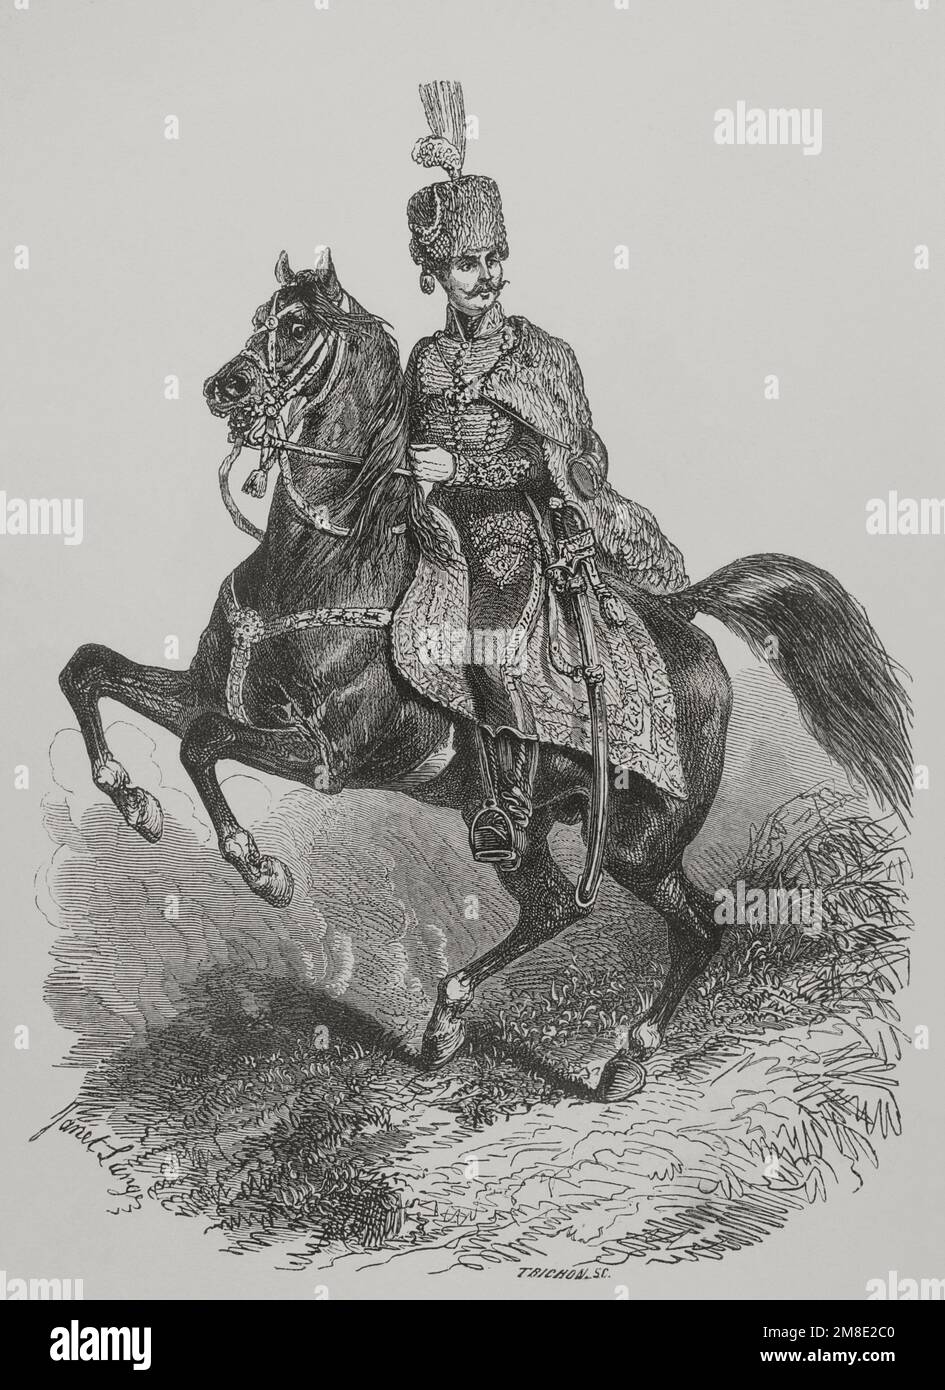 Hungarian cavalry. Engraving by Janet Lange and Trichon. 'Los Heroes y las Grandezas de la Tierra' (The Heroes and the Grandeurs of the Earth). Volume VI. 1856. Author: Auguste Trichon (1814-1898). French engraver. Janet-Lange (pseudonym of Ange-Louis Janet 1815-1872). French artist. Stock Photo